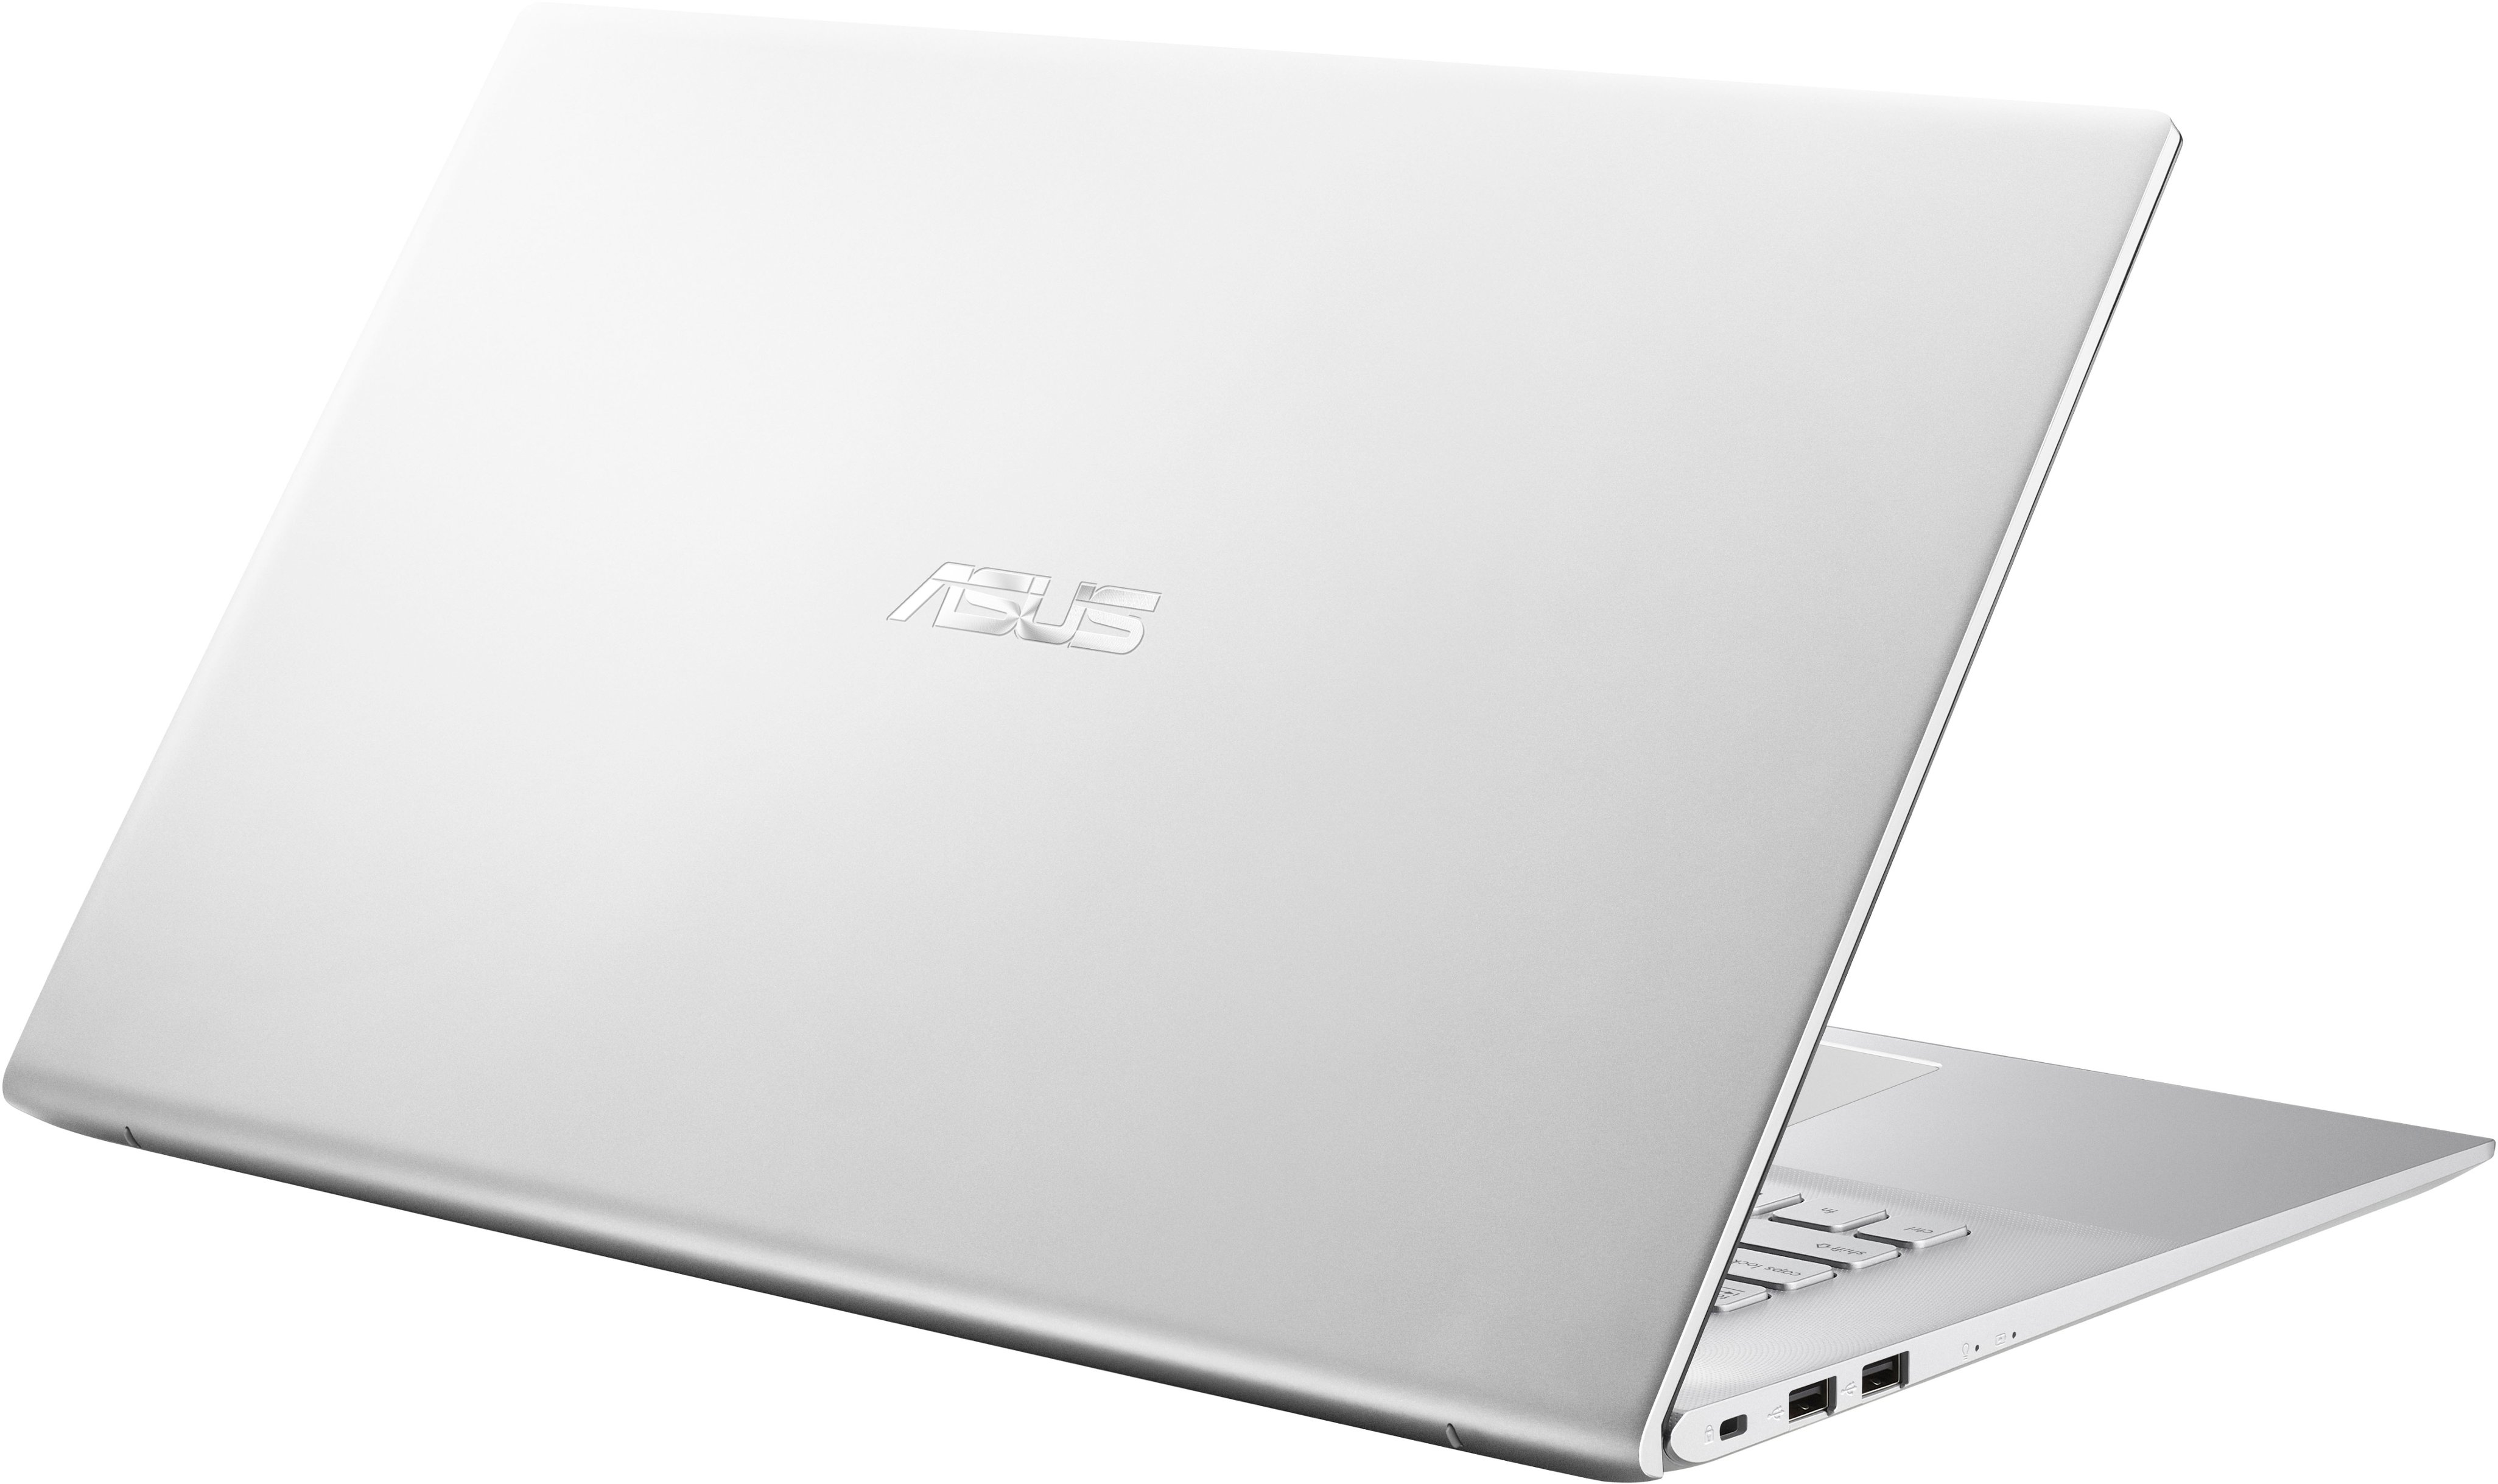 Laptop ASUS VivoBook 17 X705UA-BX418, Intel Core I3-6006U, 4Go DDR4, 1To,  DVD-RW, 17.3, FreeDos, Gris ALL WHAT OFFICE NEEDS